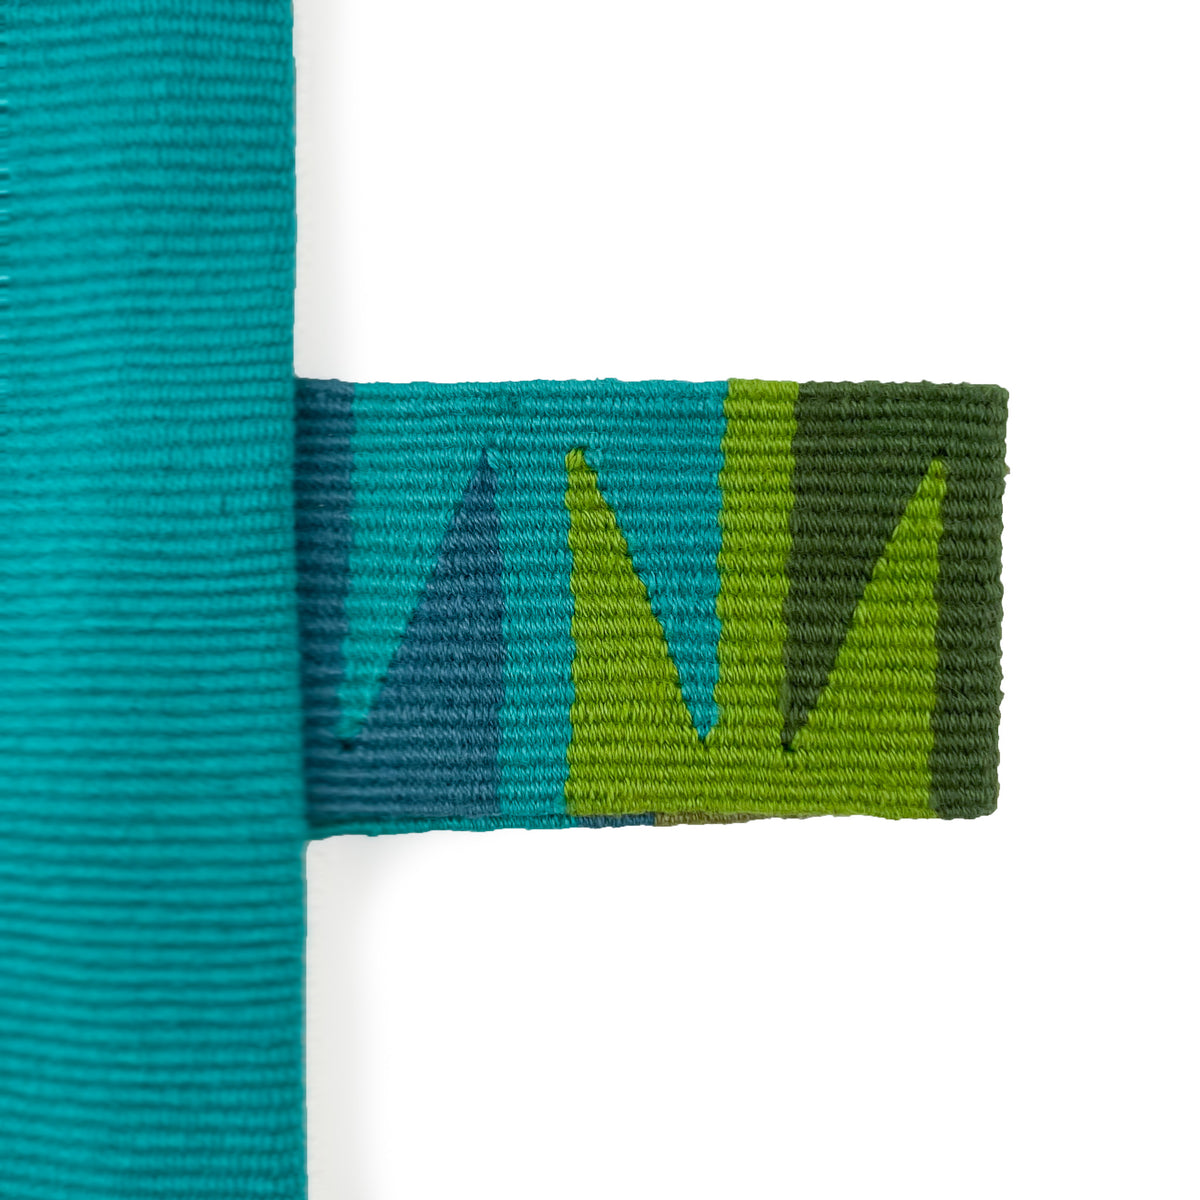 Closeup of handwoven cinta tag in turquoise, teal, and shades of green